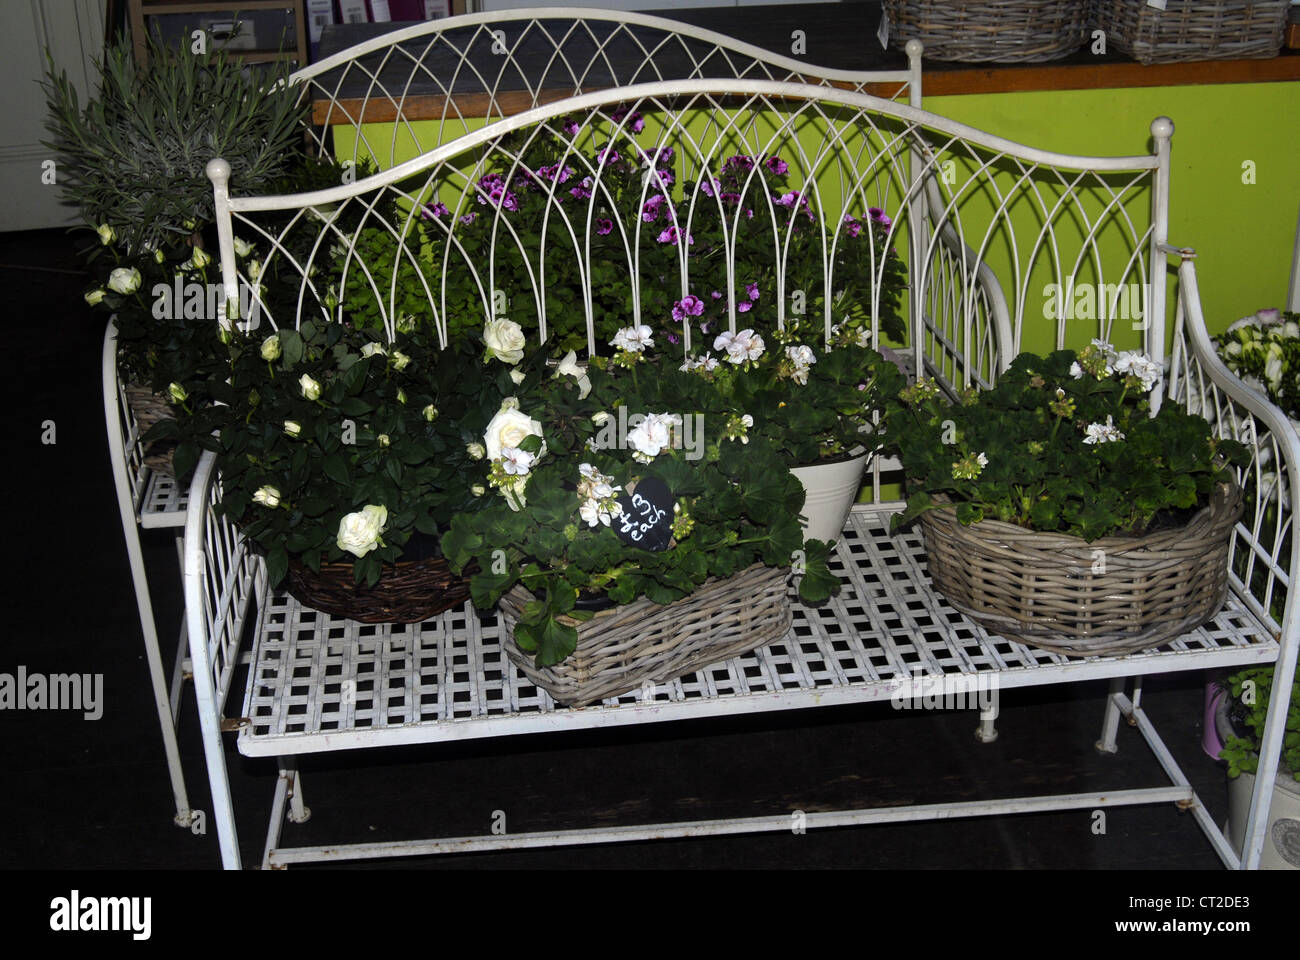 Bench with floral baskets on it Stock Photo